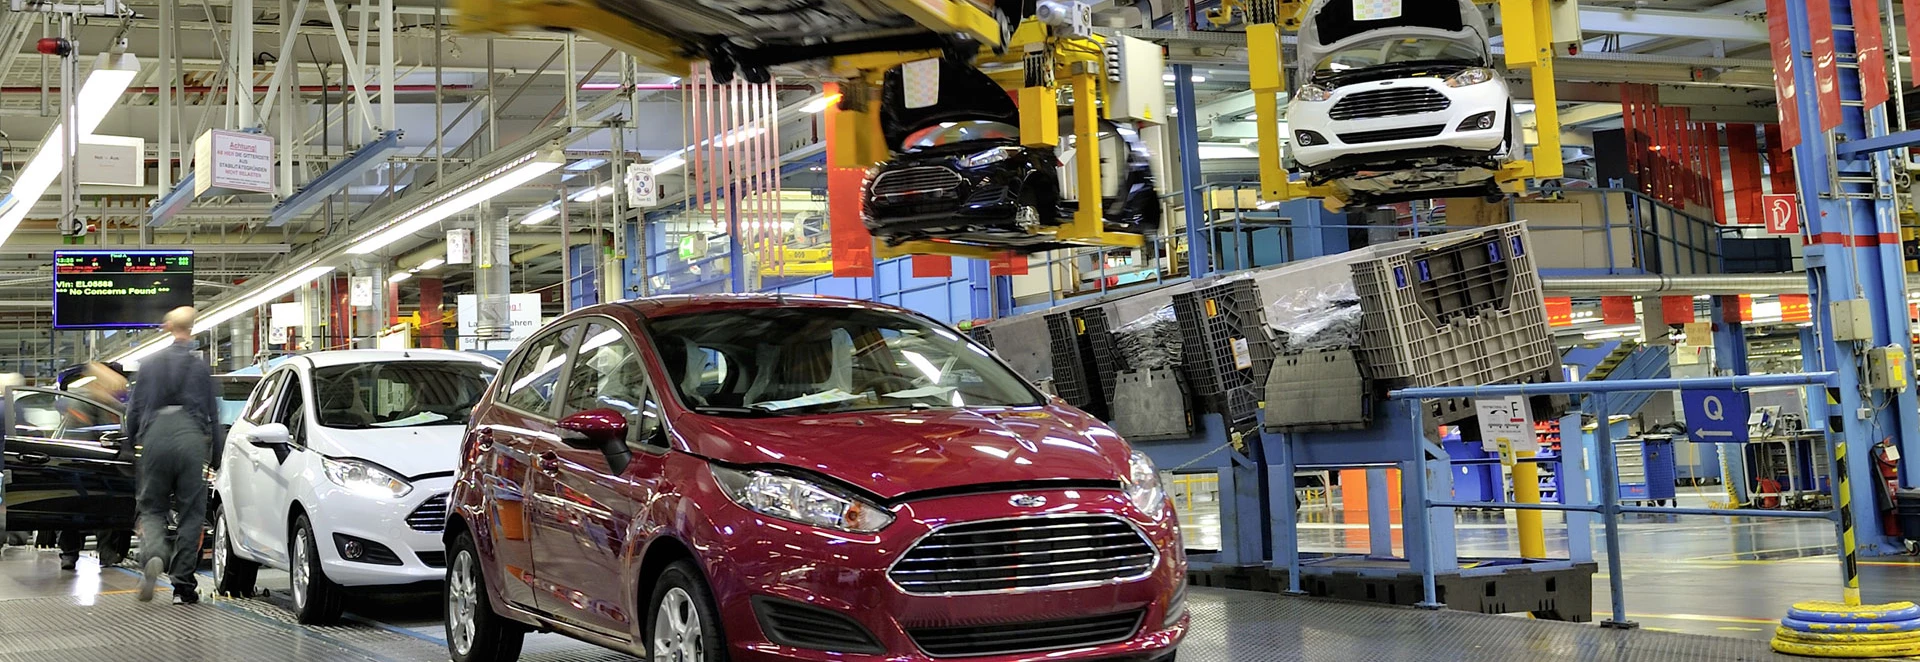 Ford Fiesta continues to lead sales as overall market figures decline